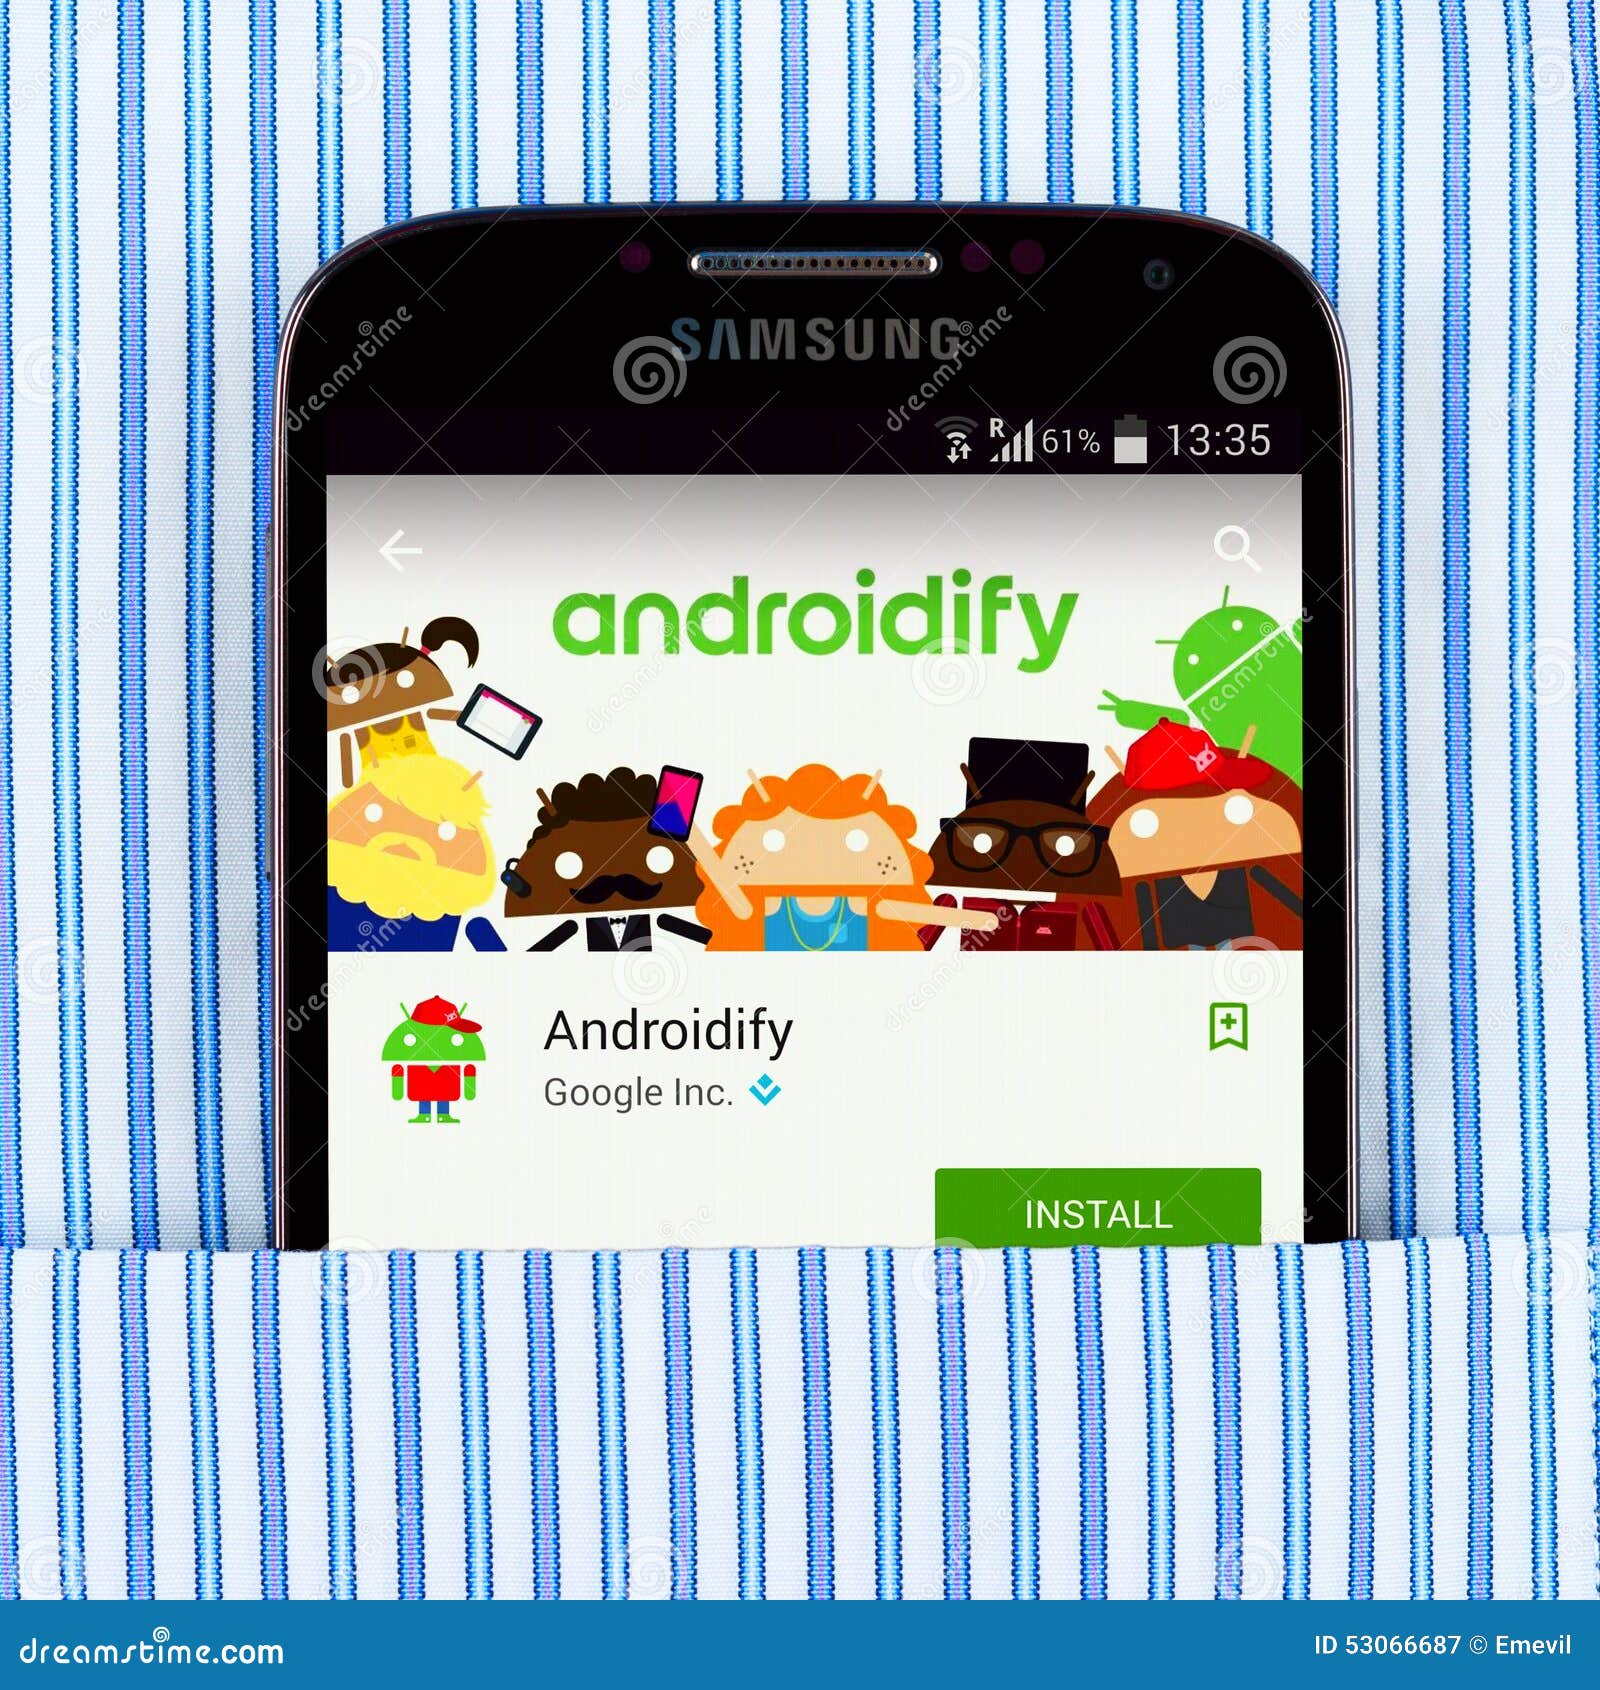 Samsung Galaxy S4 Displaying Androidify App Editorial Photography Image Of Computer Editorial